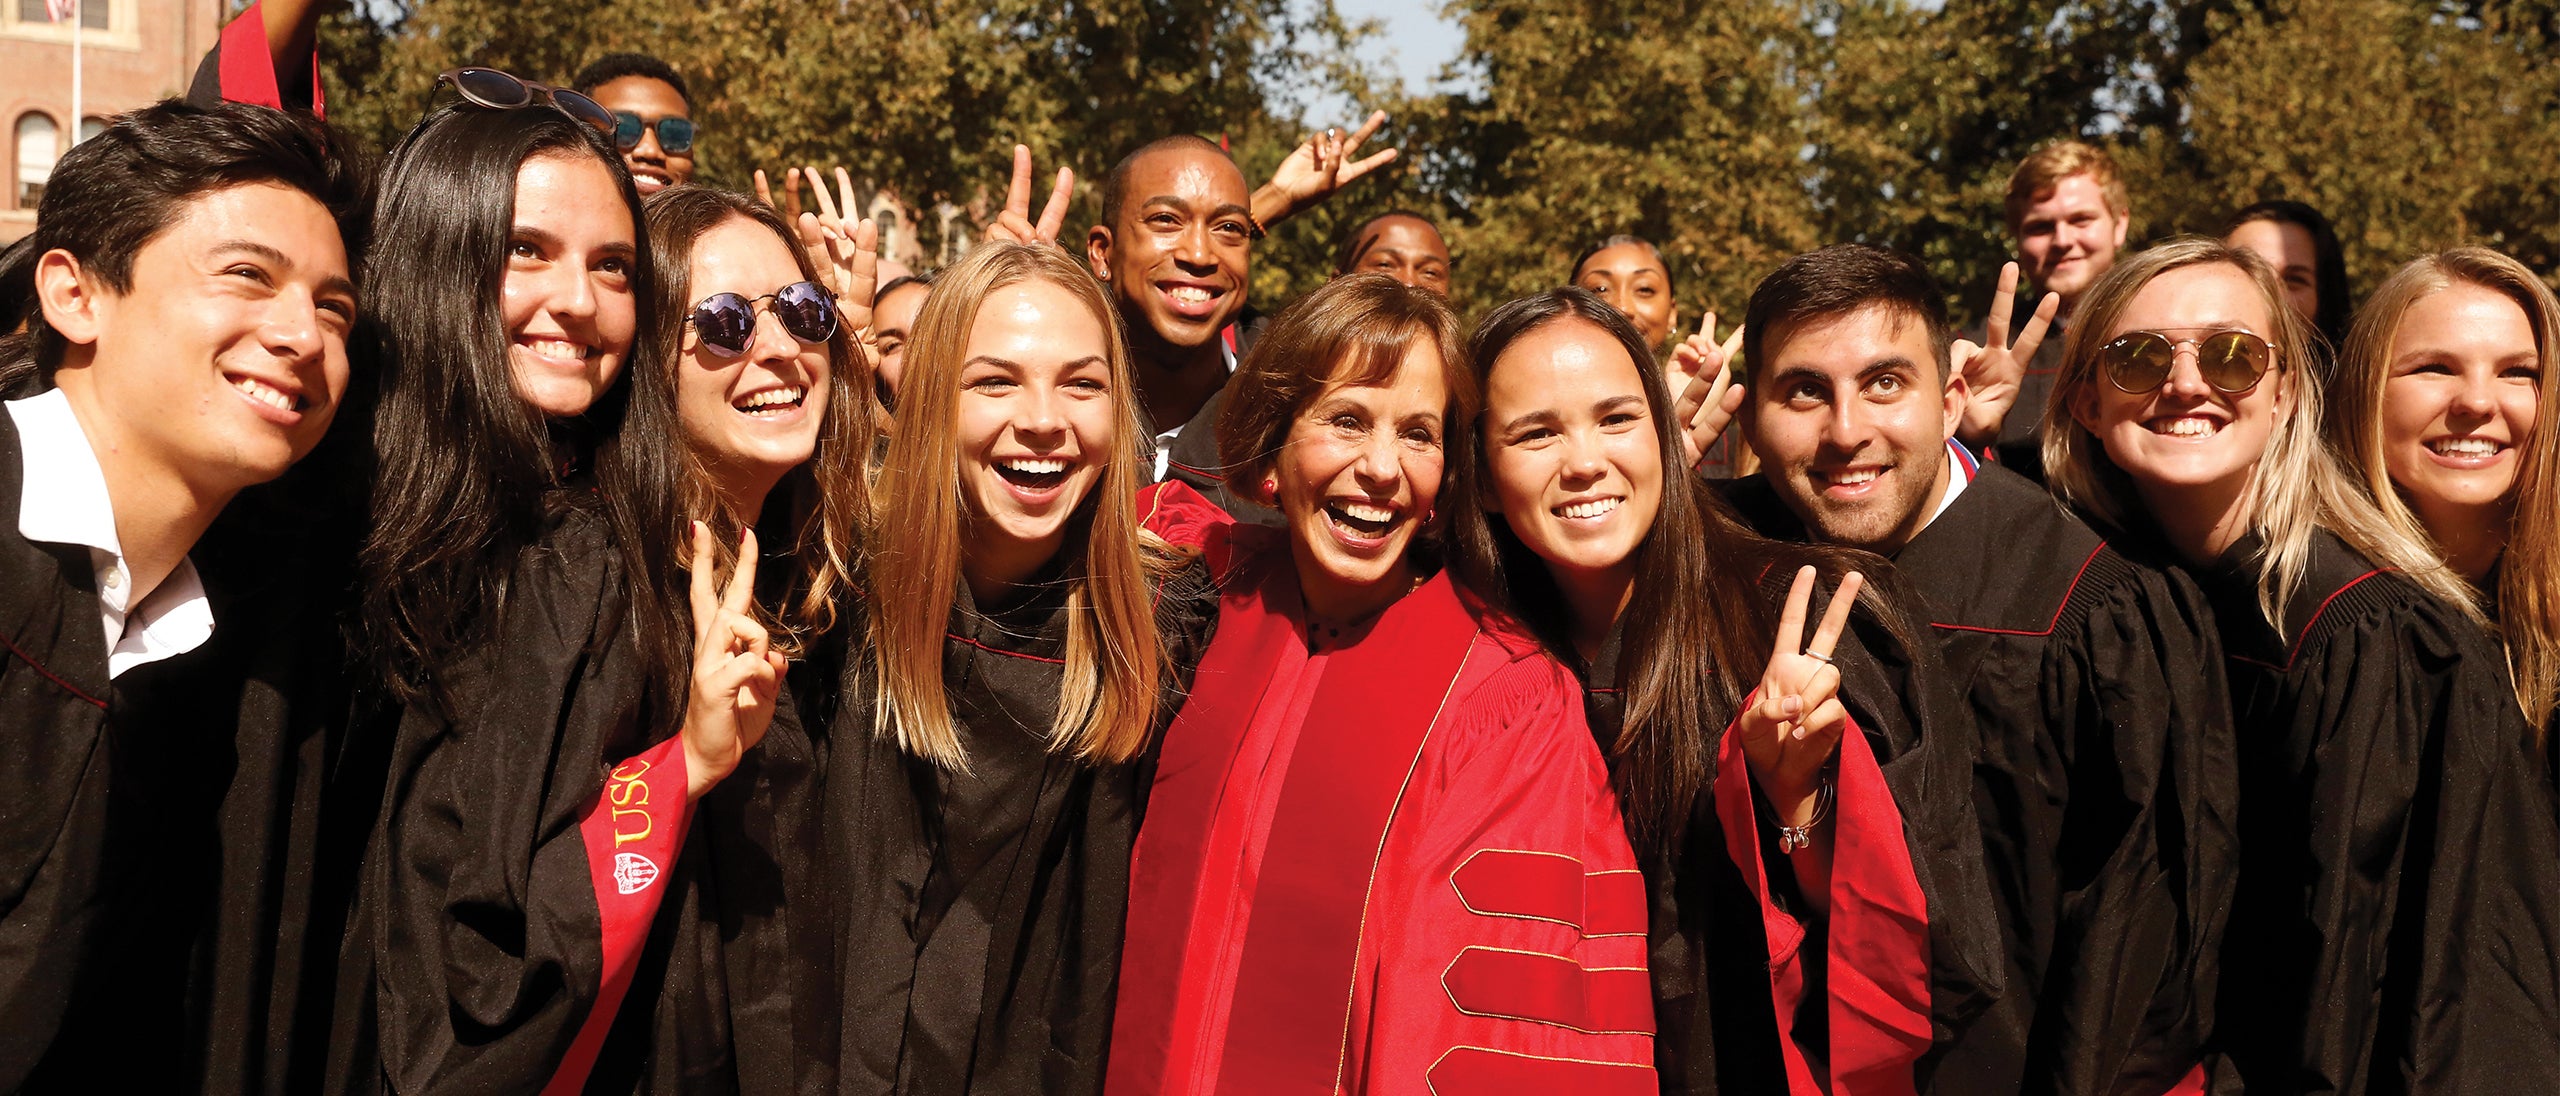 President Carol Folt with several new USC students after presiding over her first convocation ceremony at USC.